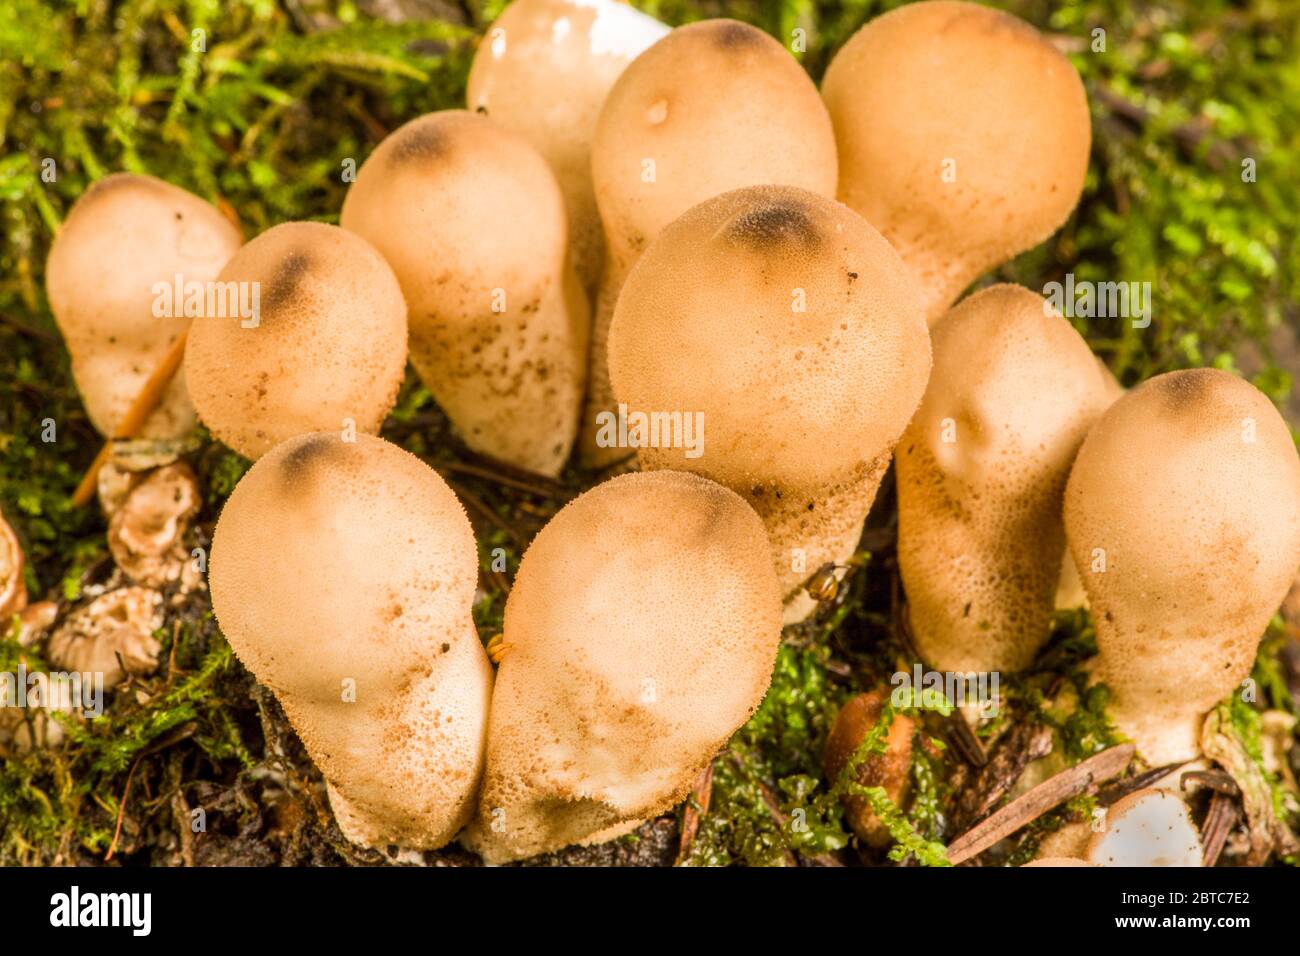 Pear-shaped Puffball (Lycoperdon pyriforme) is an edible fungi found in Autumn in compact clusters on rotten wood in conifer or mixed forests in the P Stock Photo